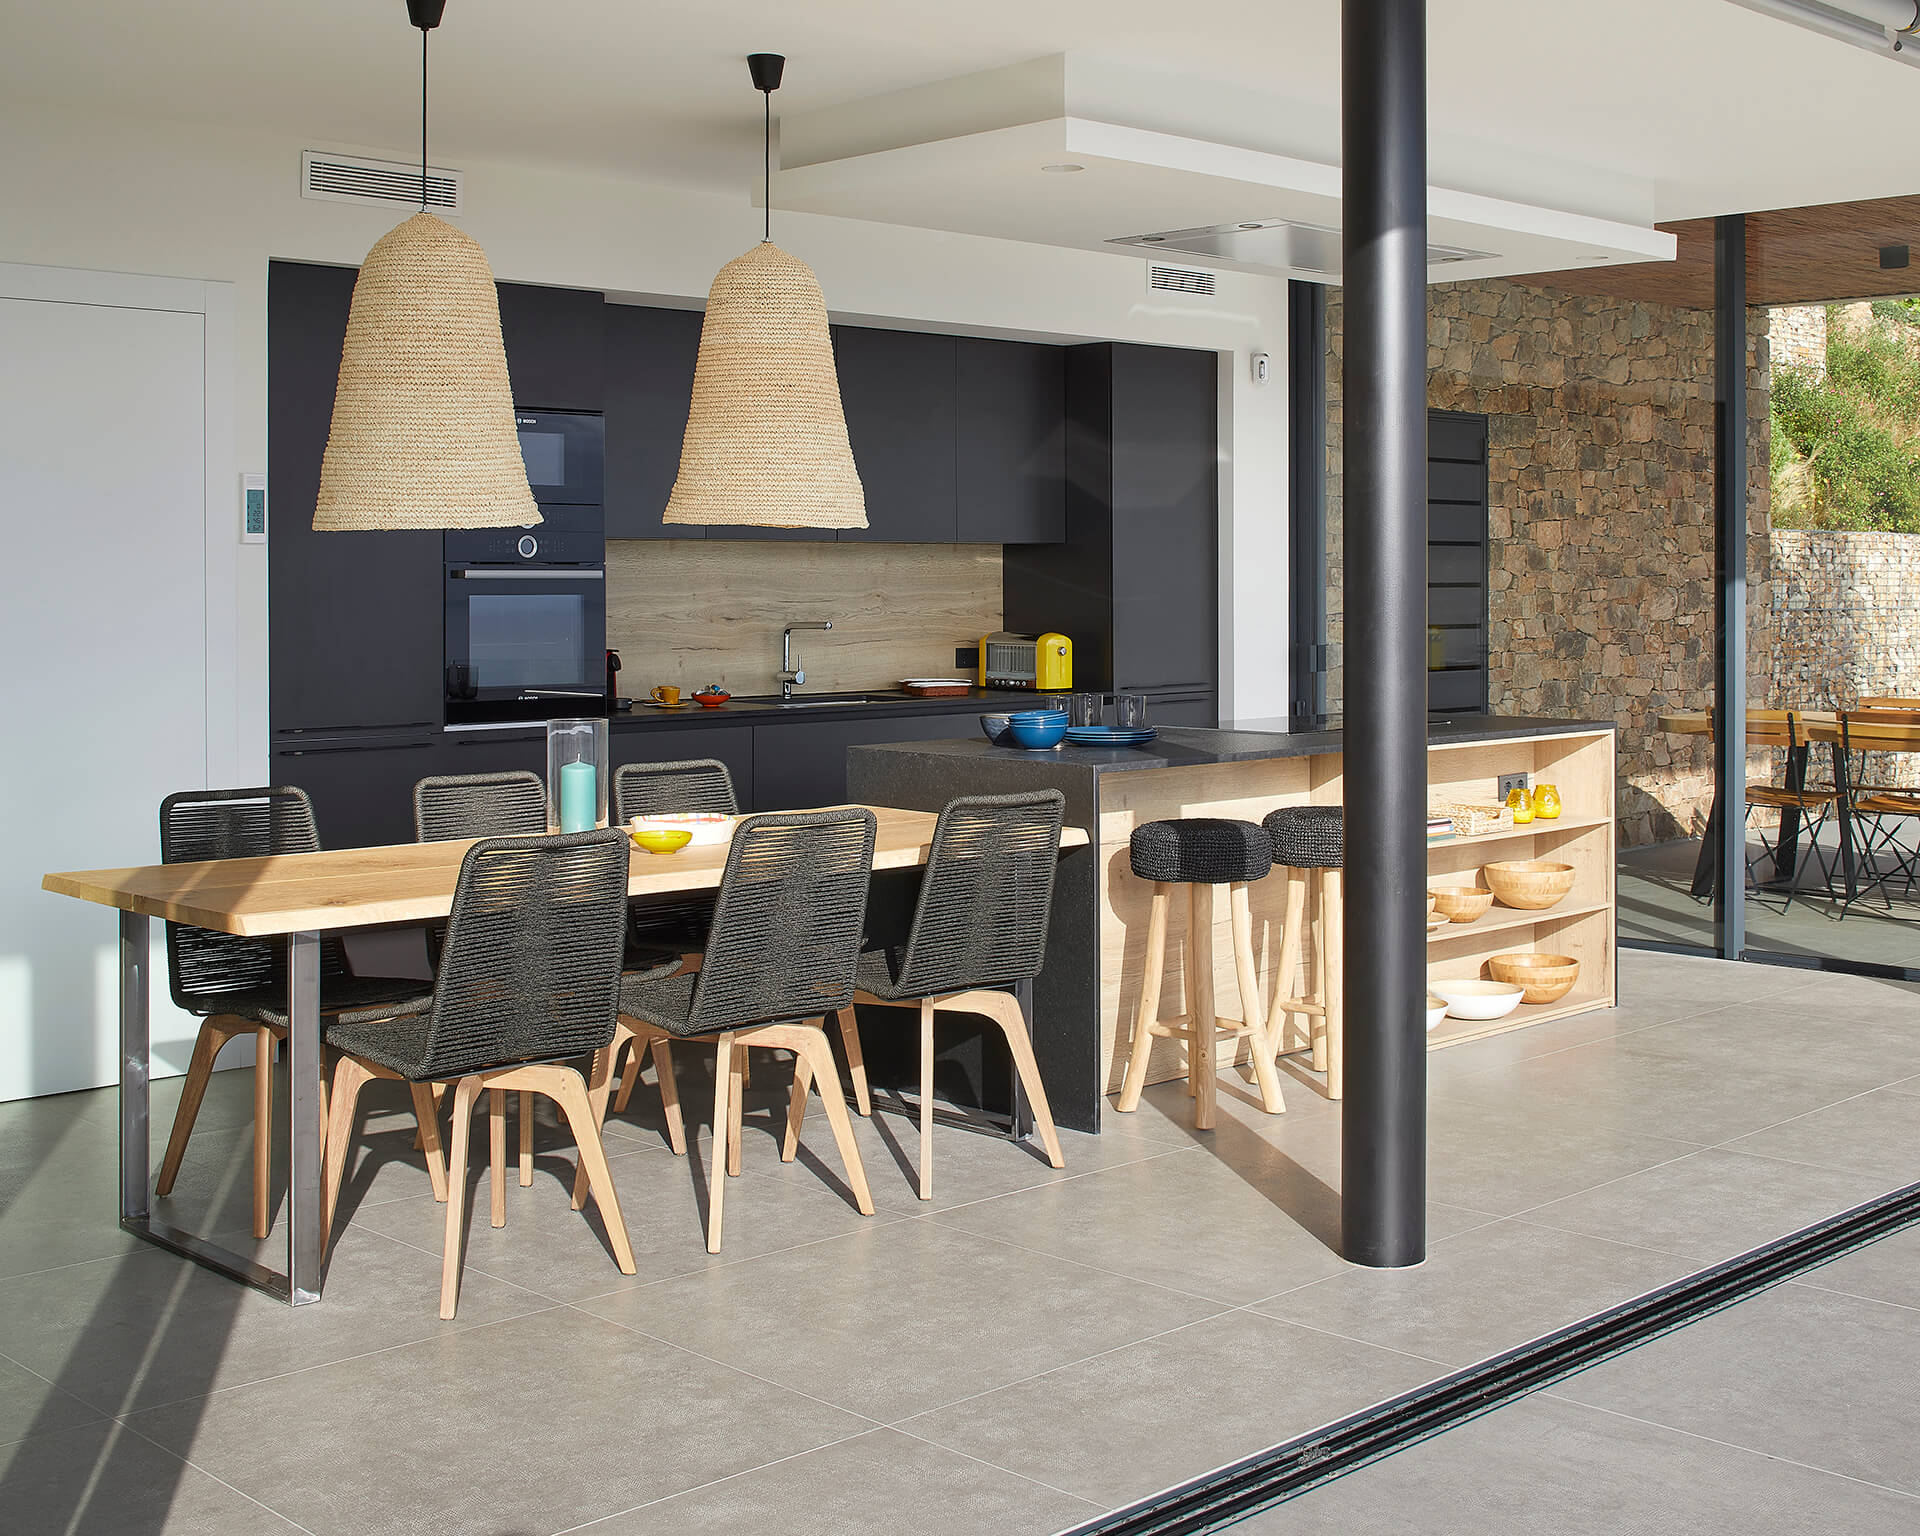 Santos kitchen finished in graphene and wood with island and dining room